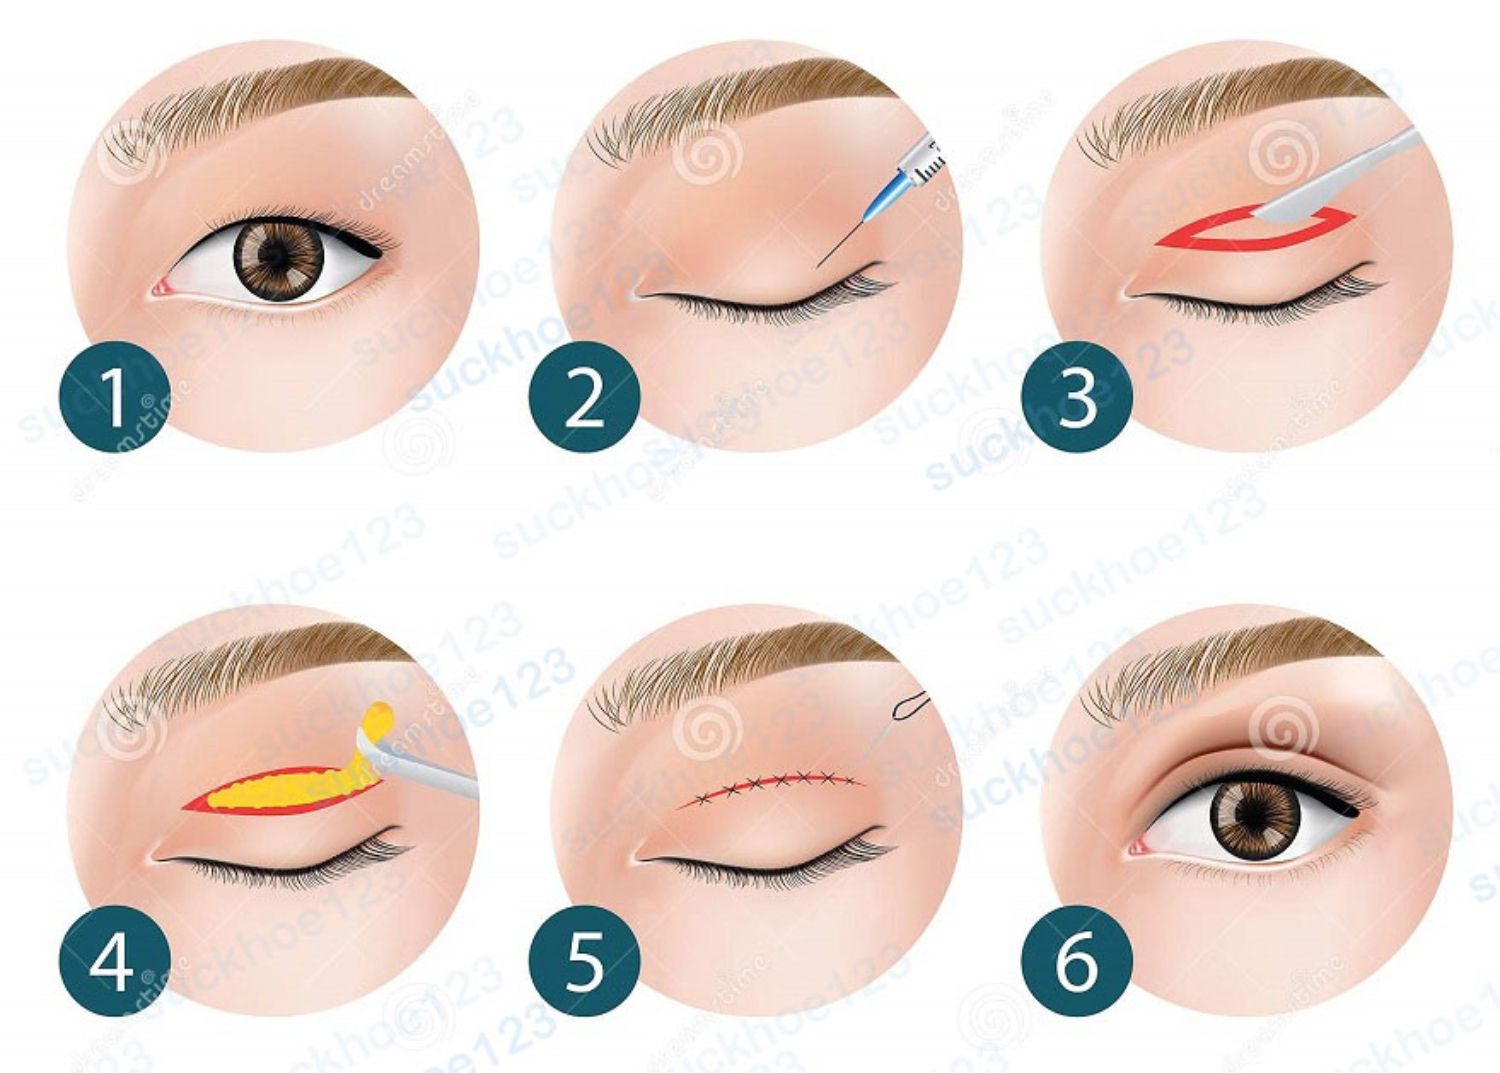 double eyelid surgery how to step vector illustration 167070123